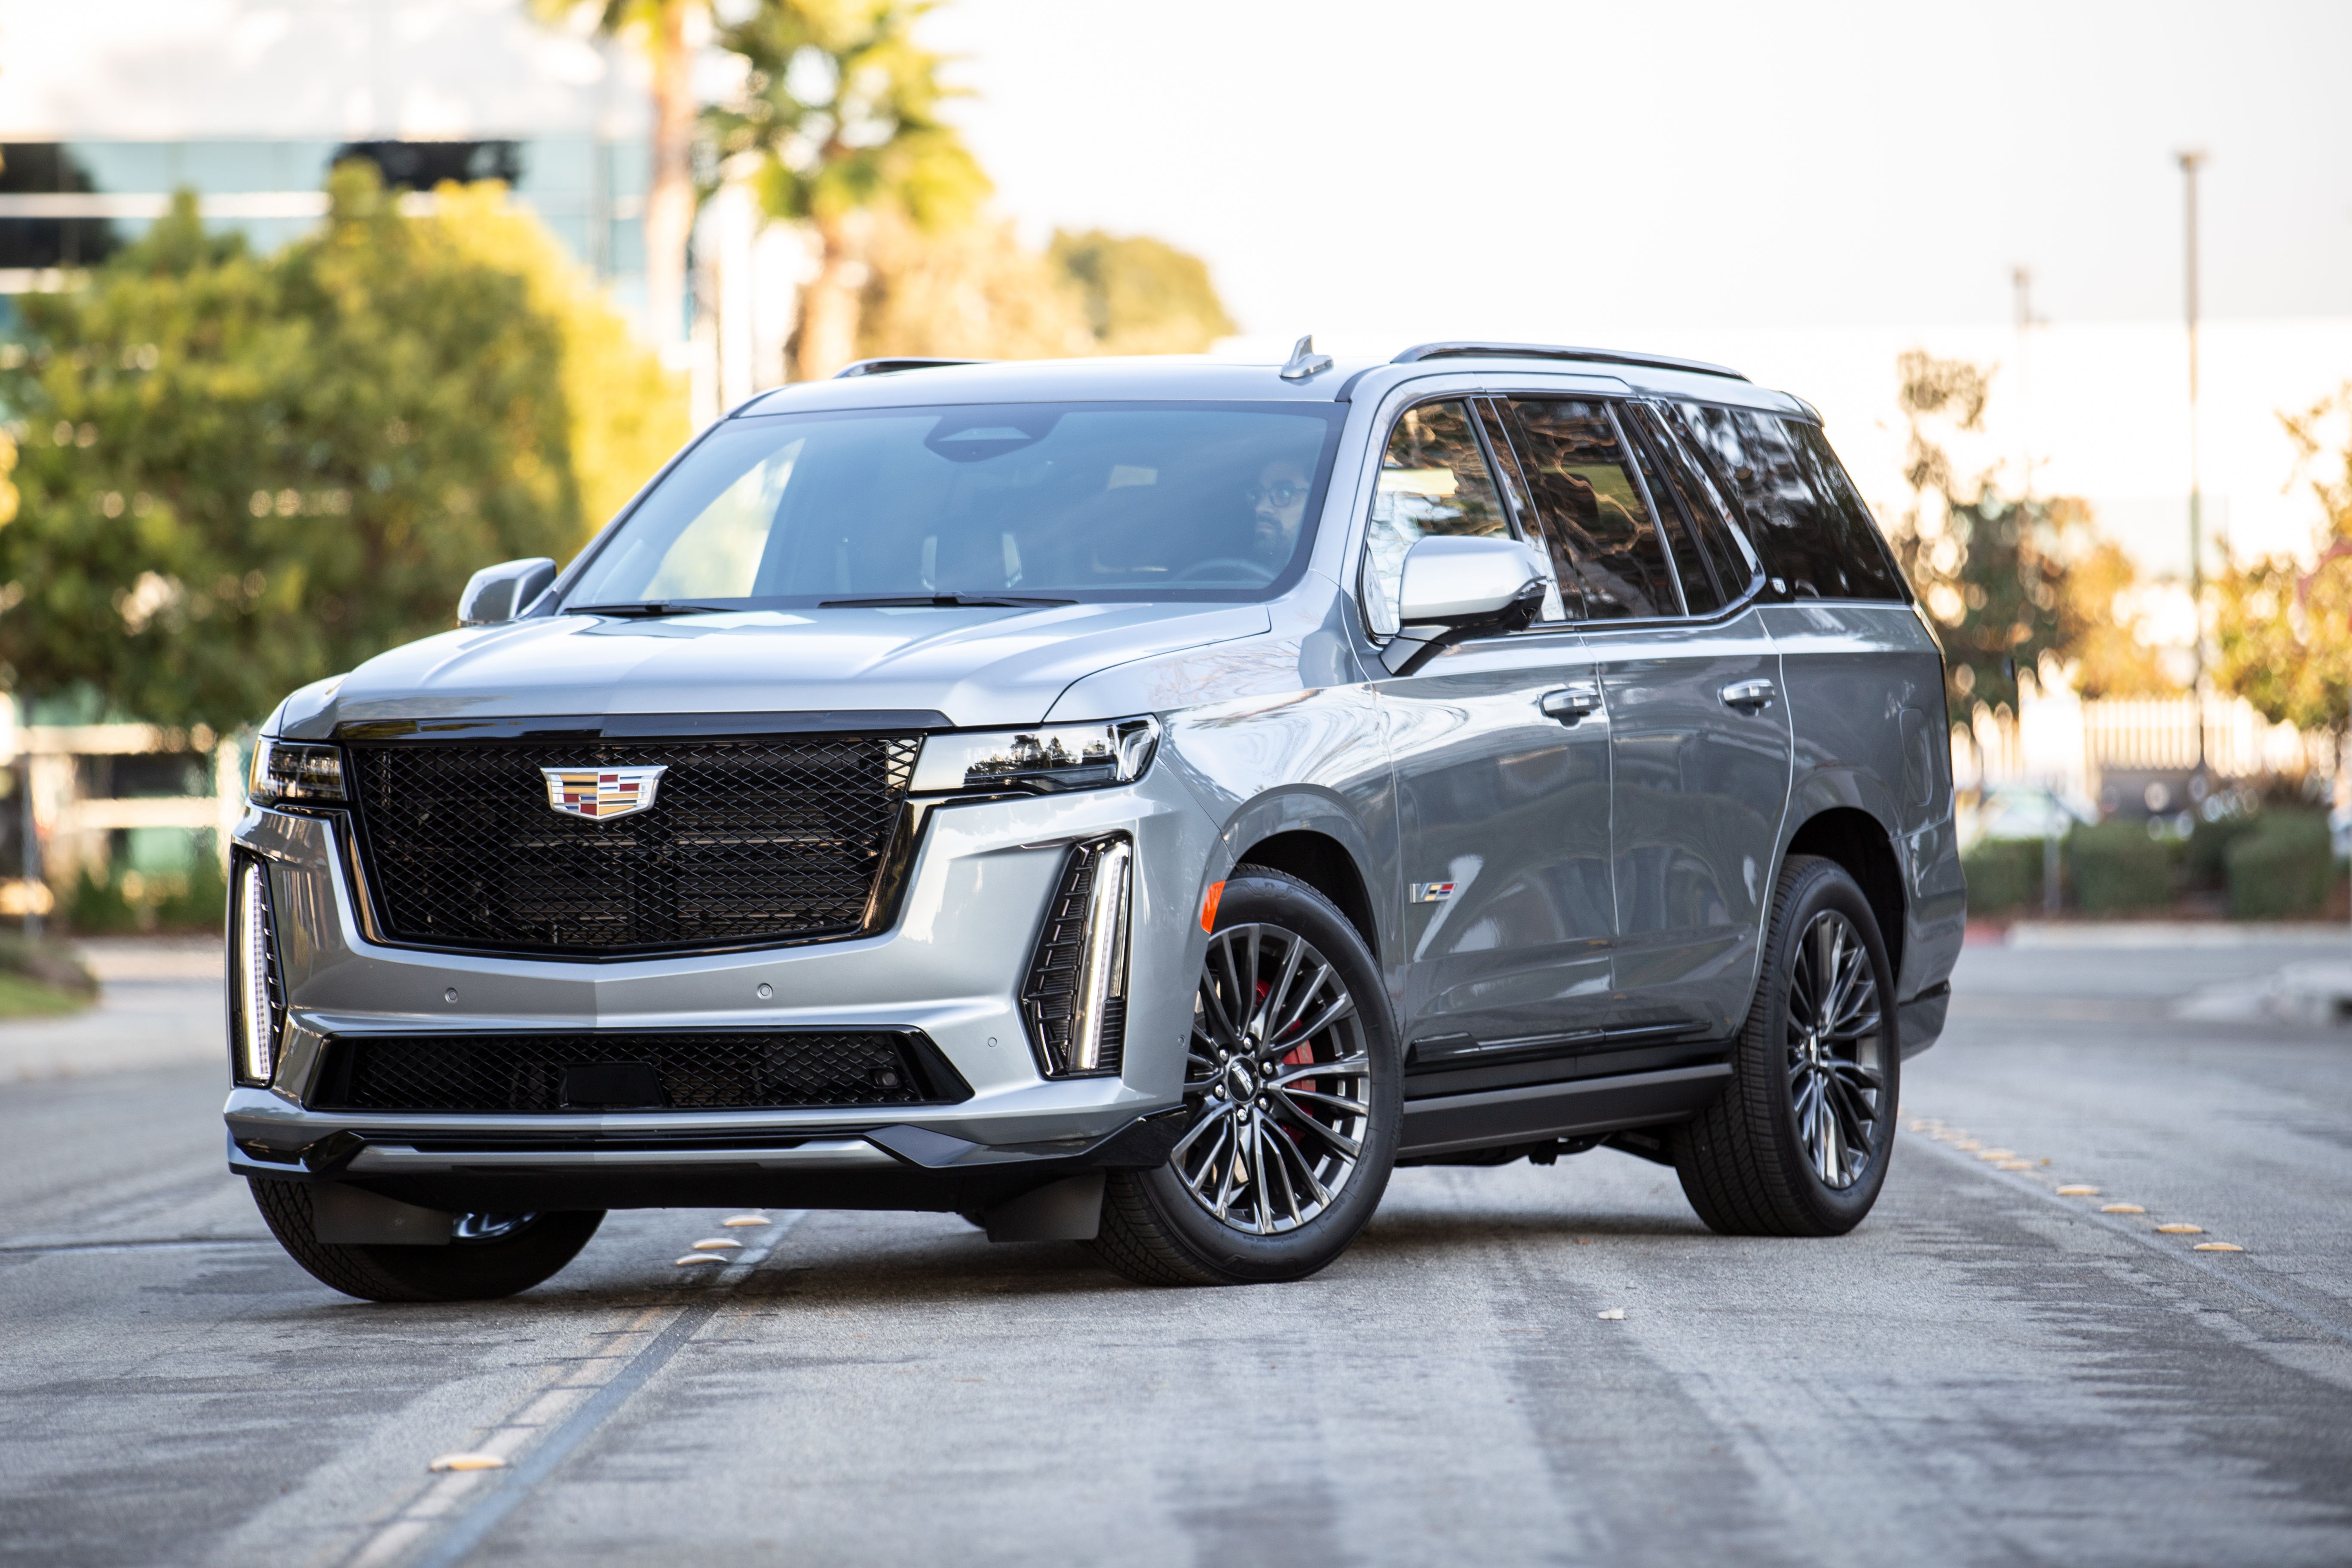 2023 Cadillac Escalade V-Series Review: This Large SUV Will Blow Your Mind